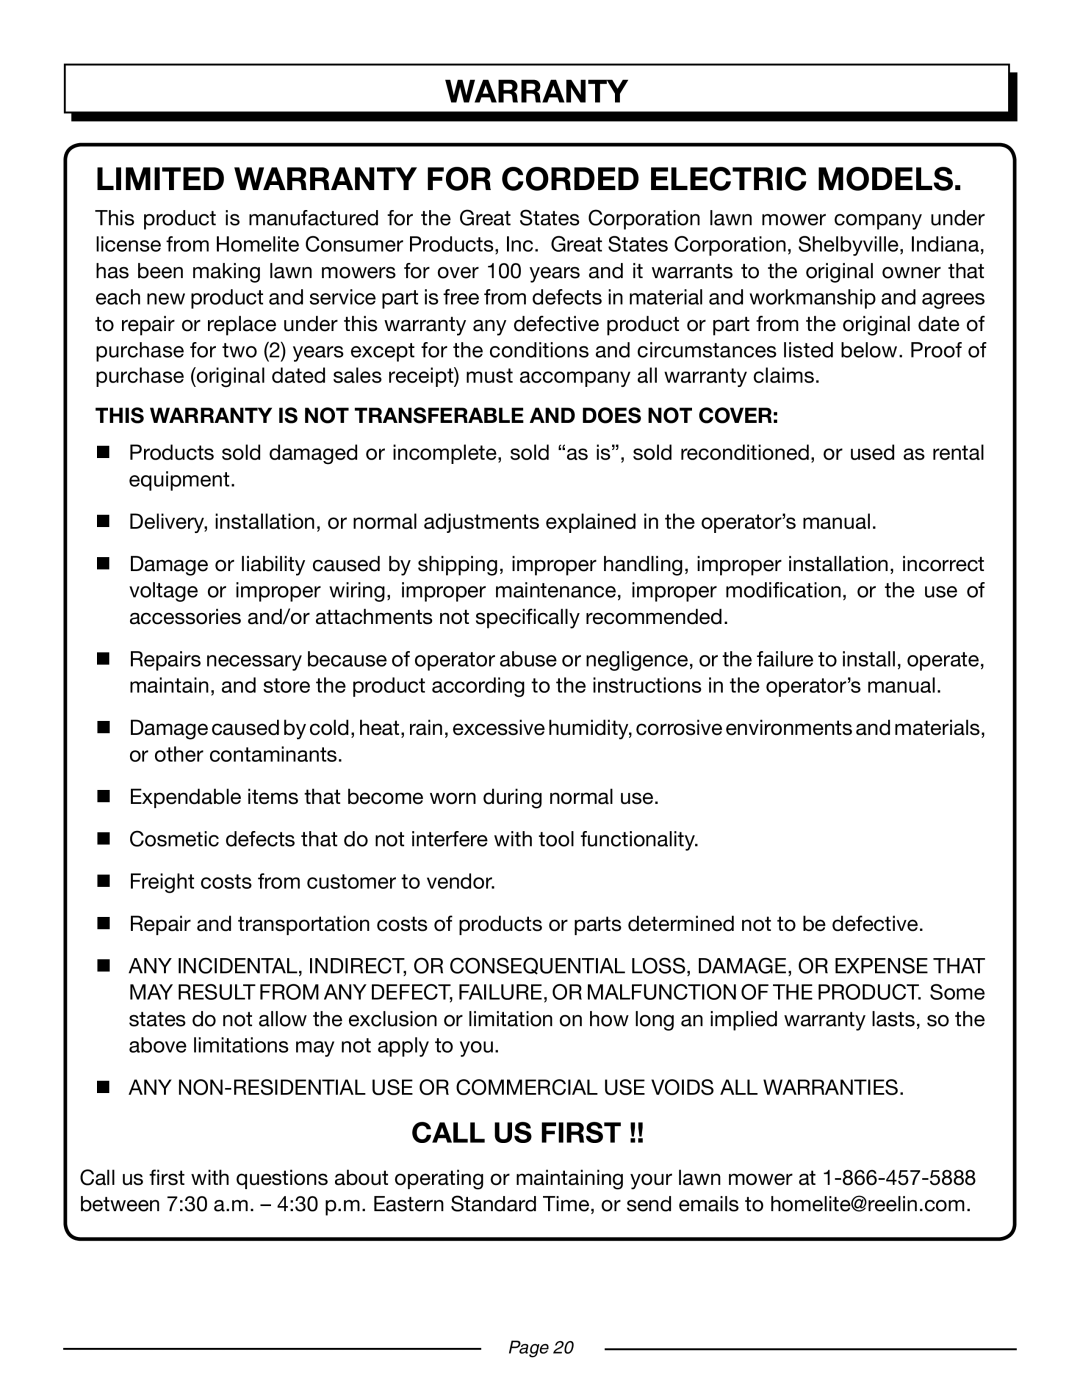 Homelite UT13218, UT13220 manual Limited Warranty For Corded Electric Models, Call Us First 